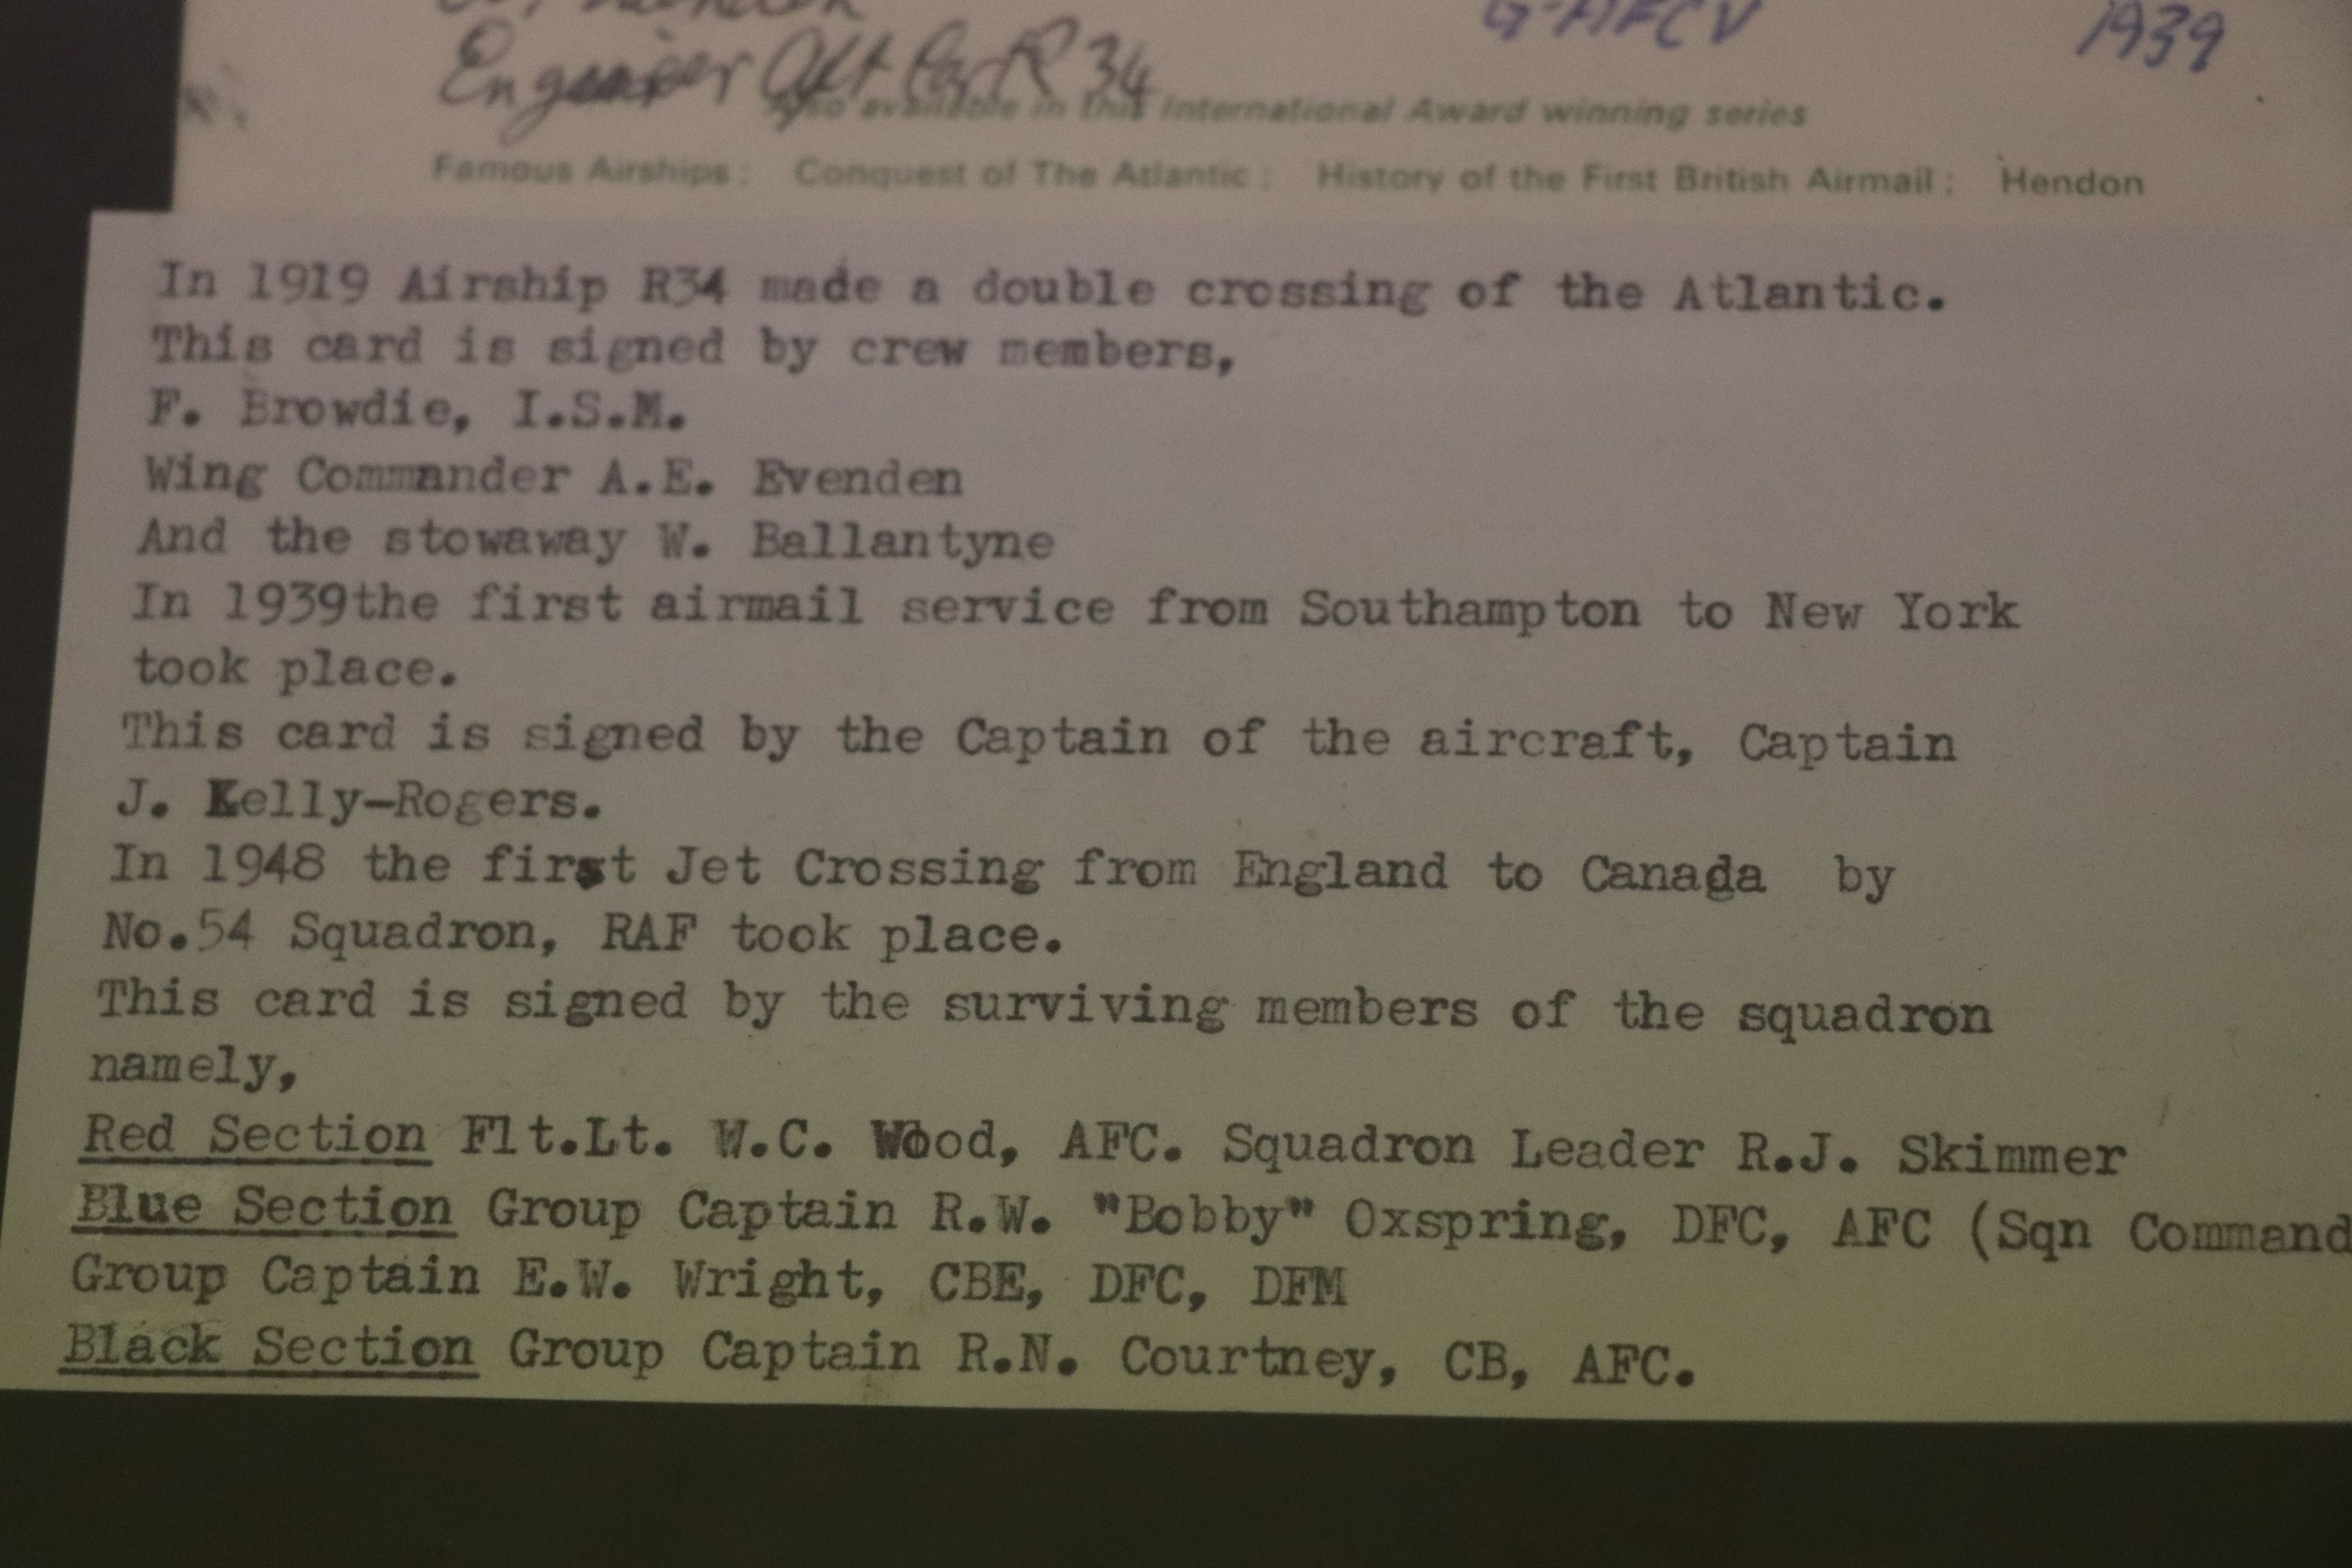 Conquest of The Atlantic postcard (mounted) signed by crew members Browdie, Wing Commander Evenden - Image 3 of 4